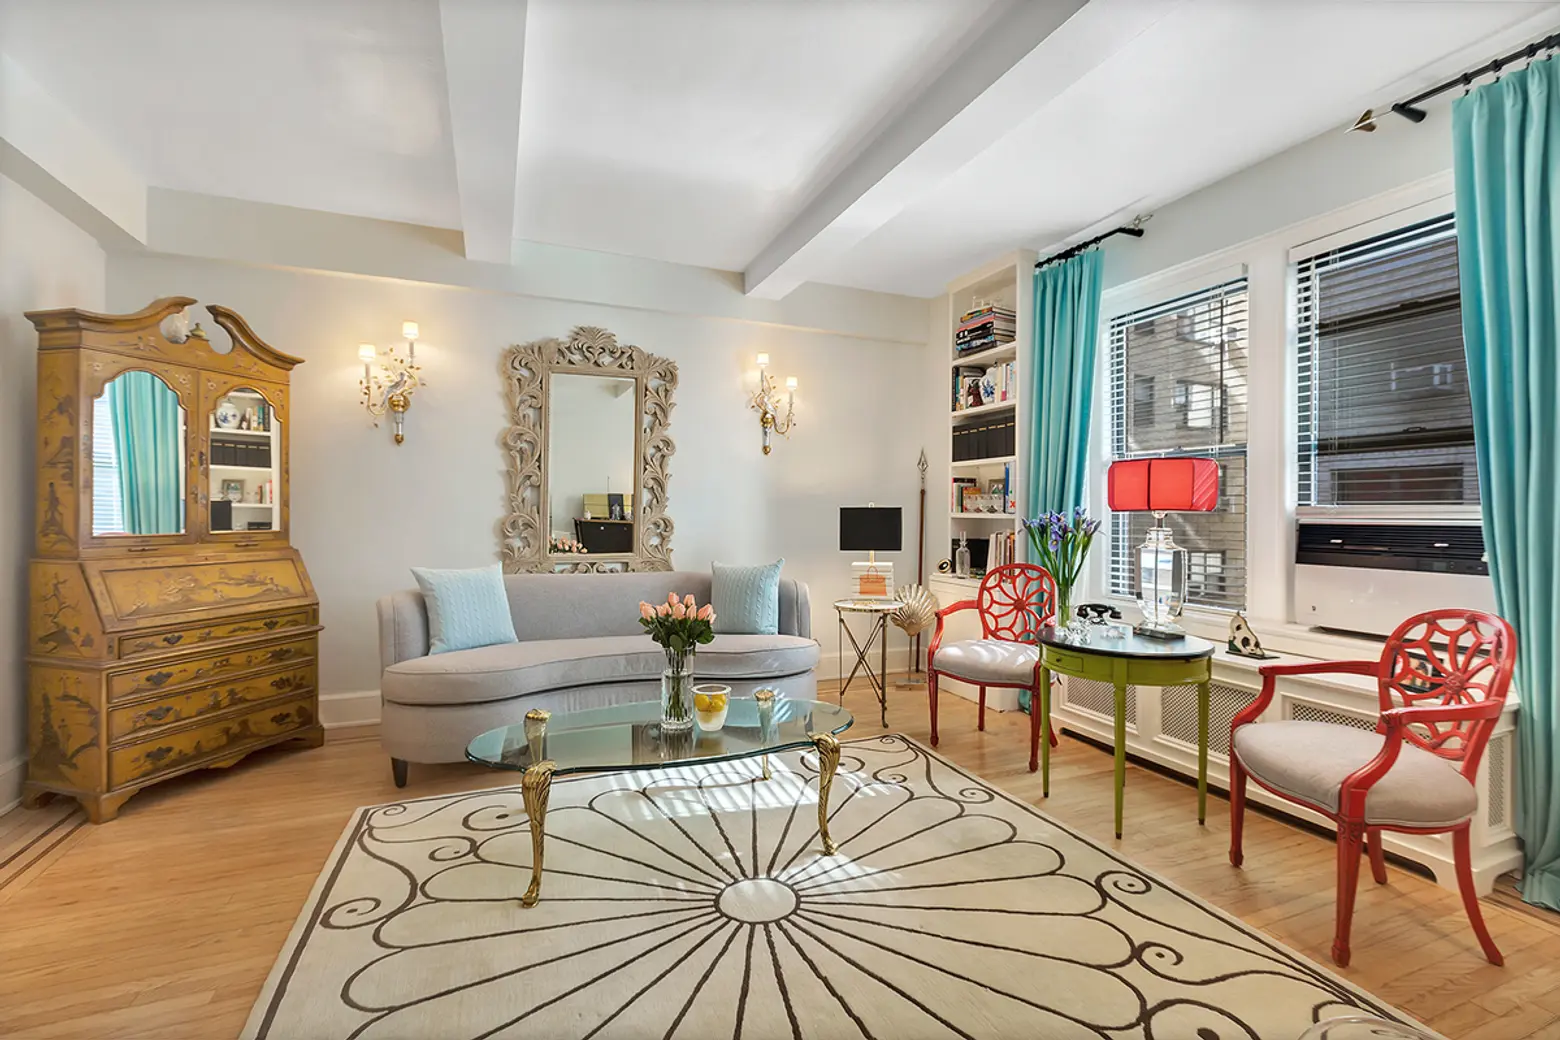 One Bedroom Co-op at the Beekman Hill House Is the Ideal Starter Apartment